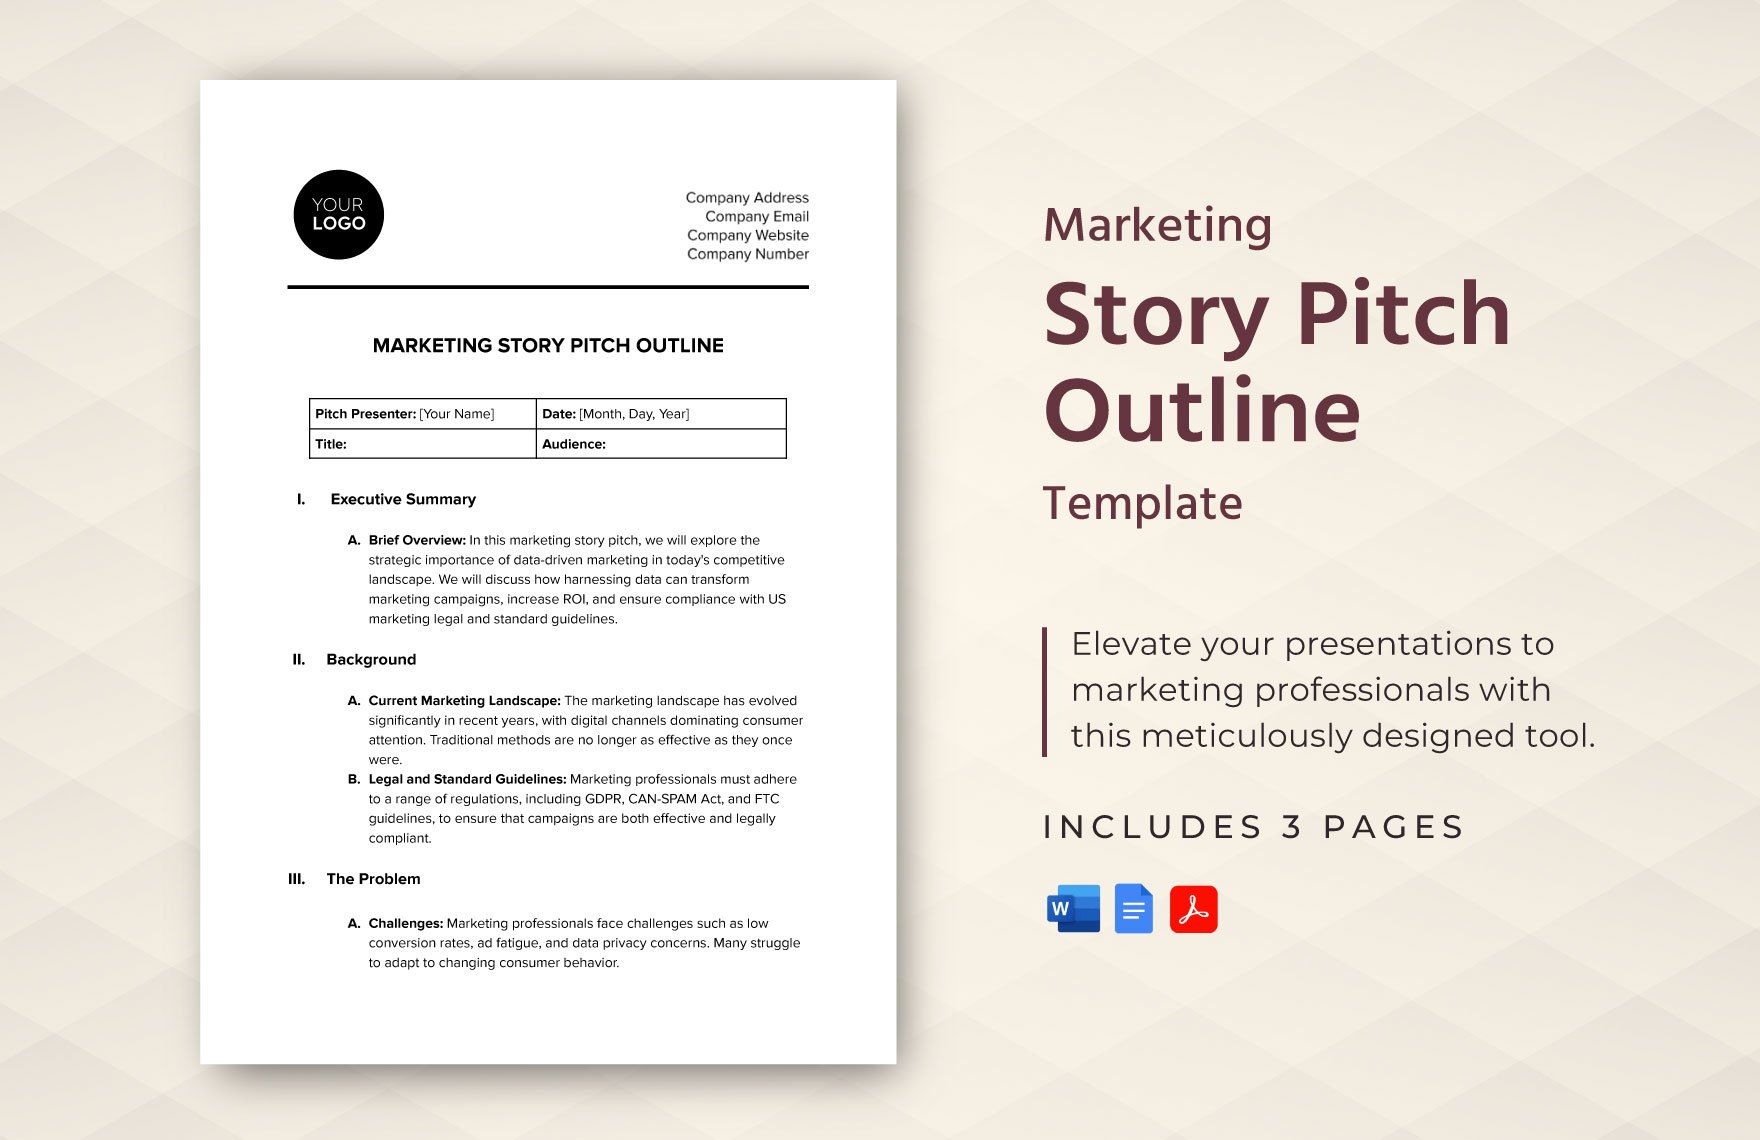 Marketing Story Pitch Outline Template in Word, Google Docs, PDF